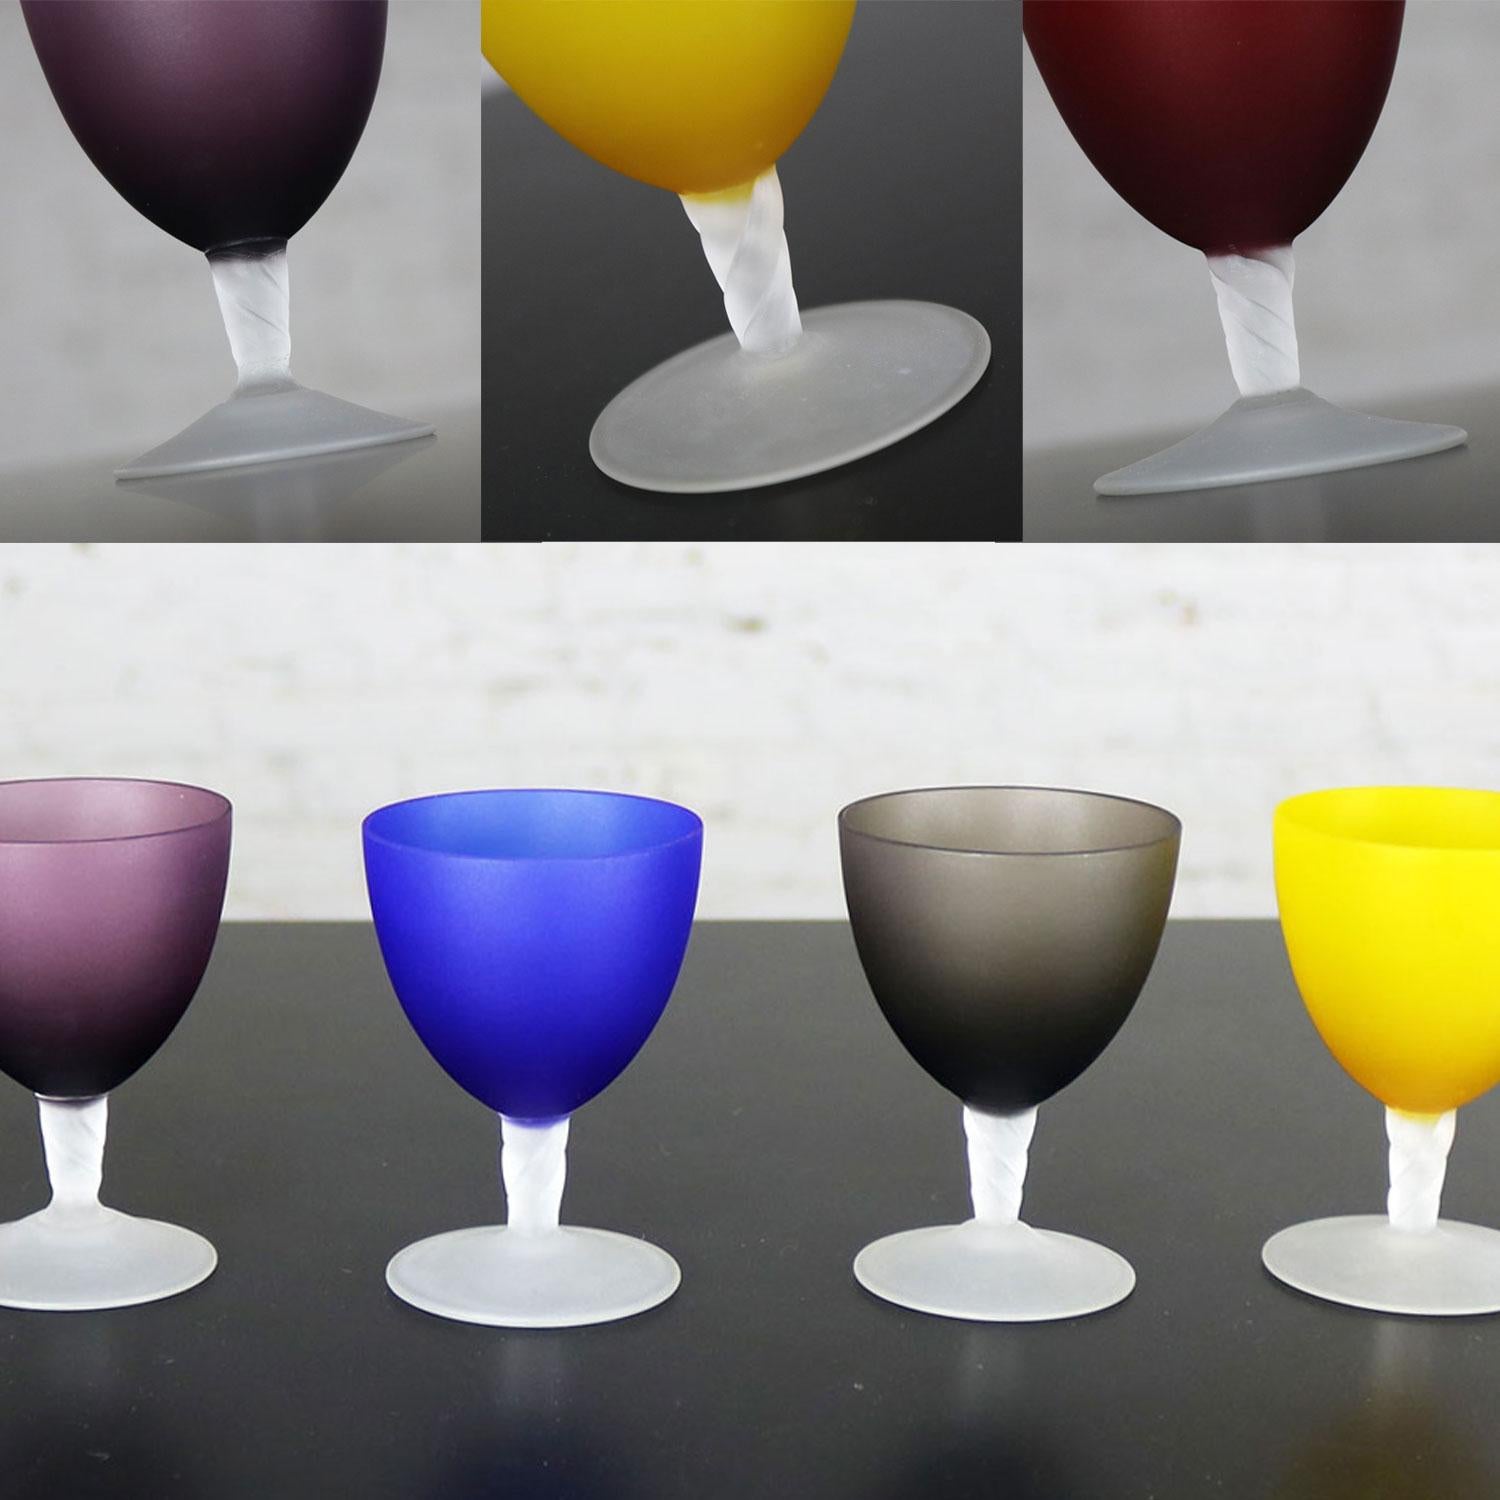 Set of 5 Small Multicolored Frosted Glass Wine Coupes or Cordial Glasses 11